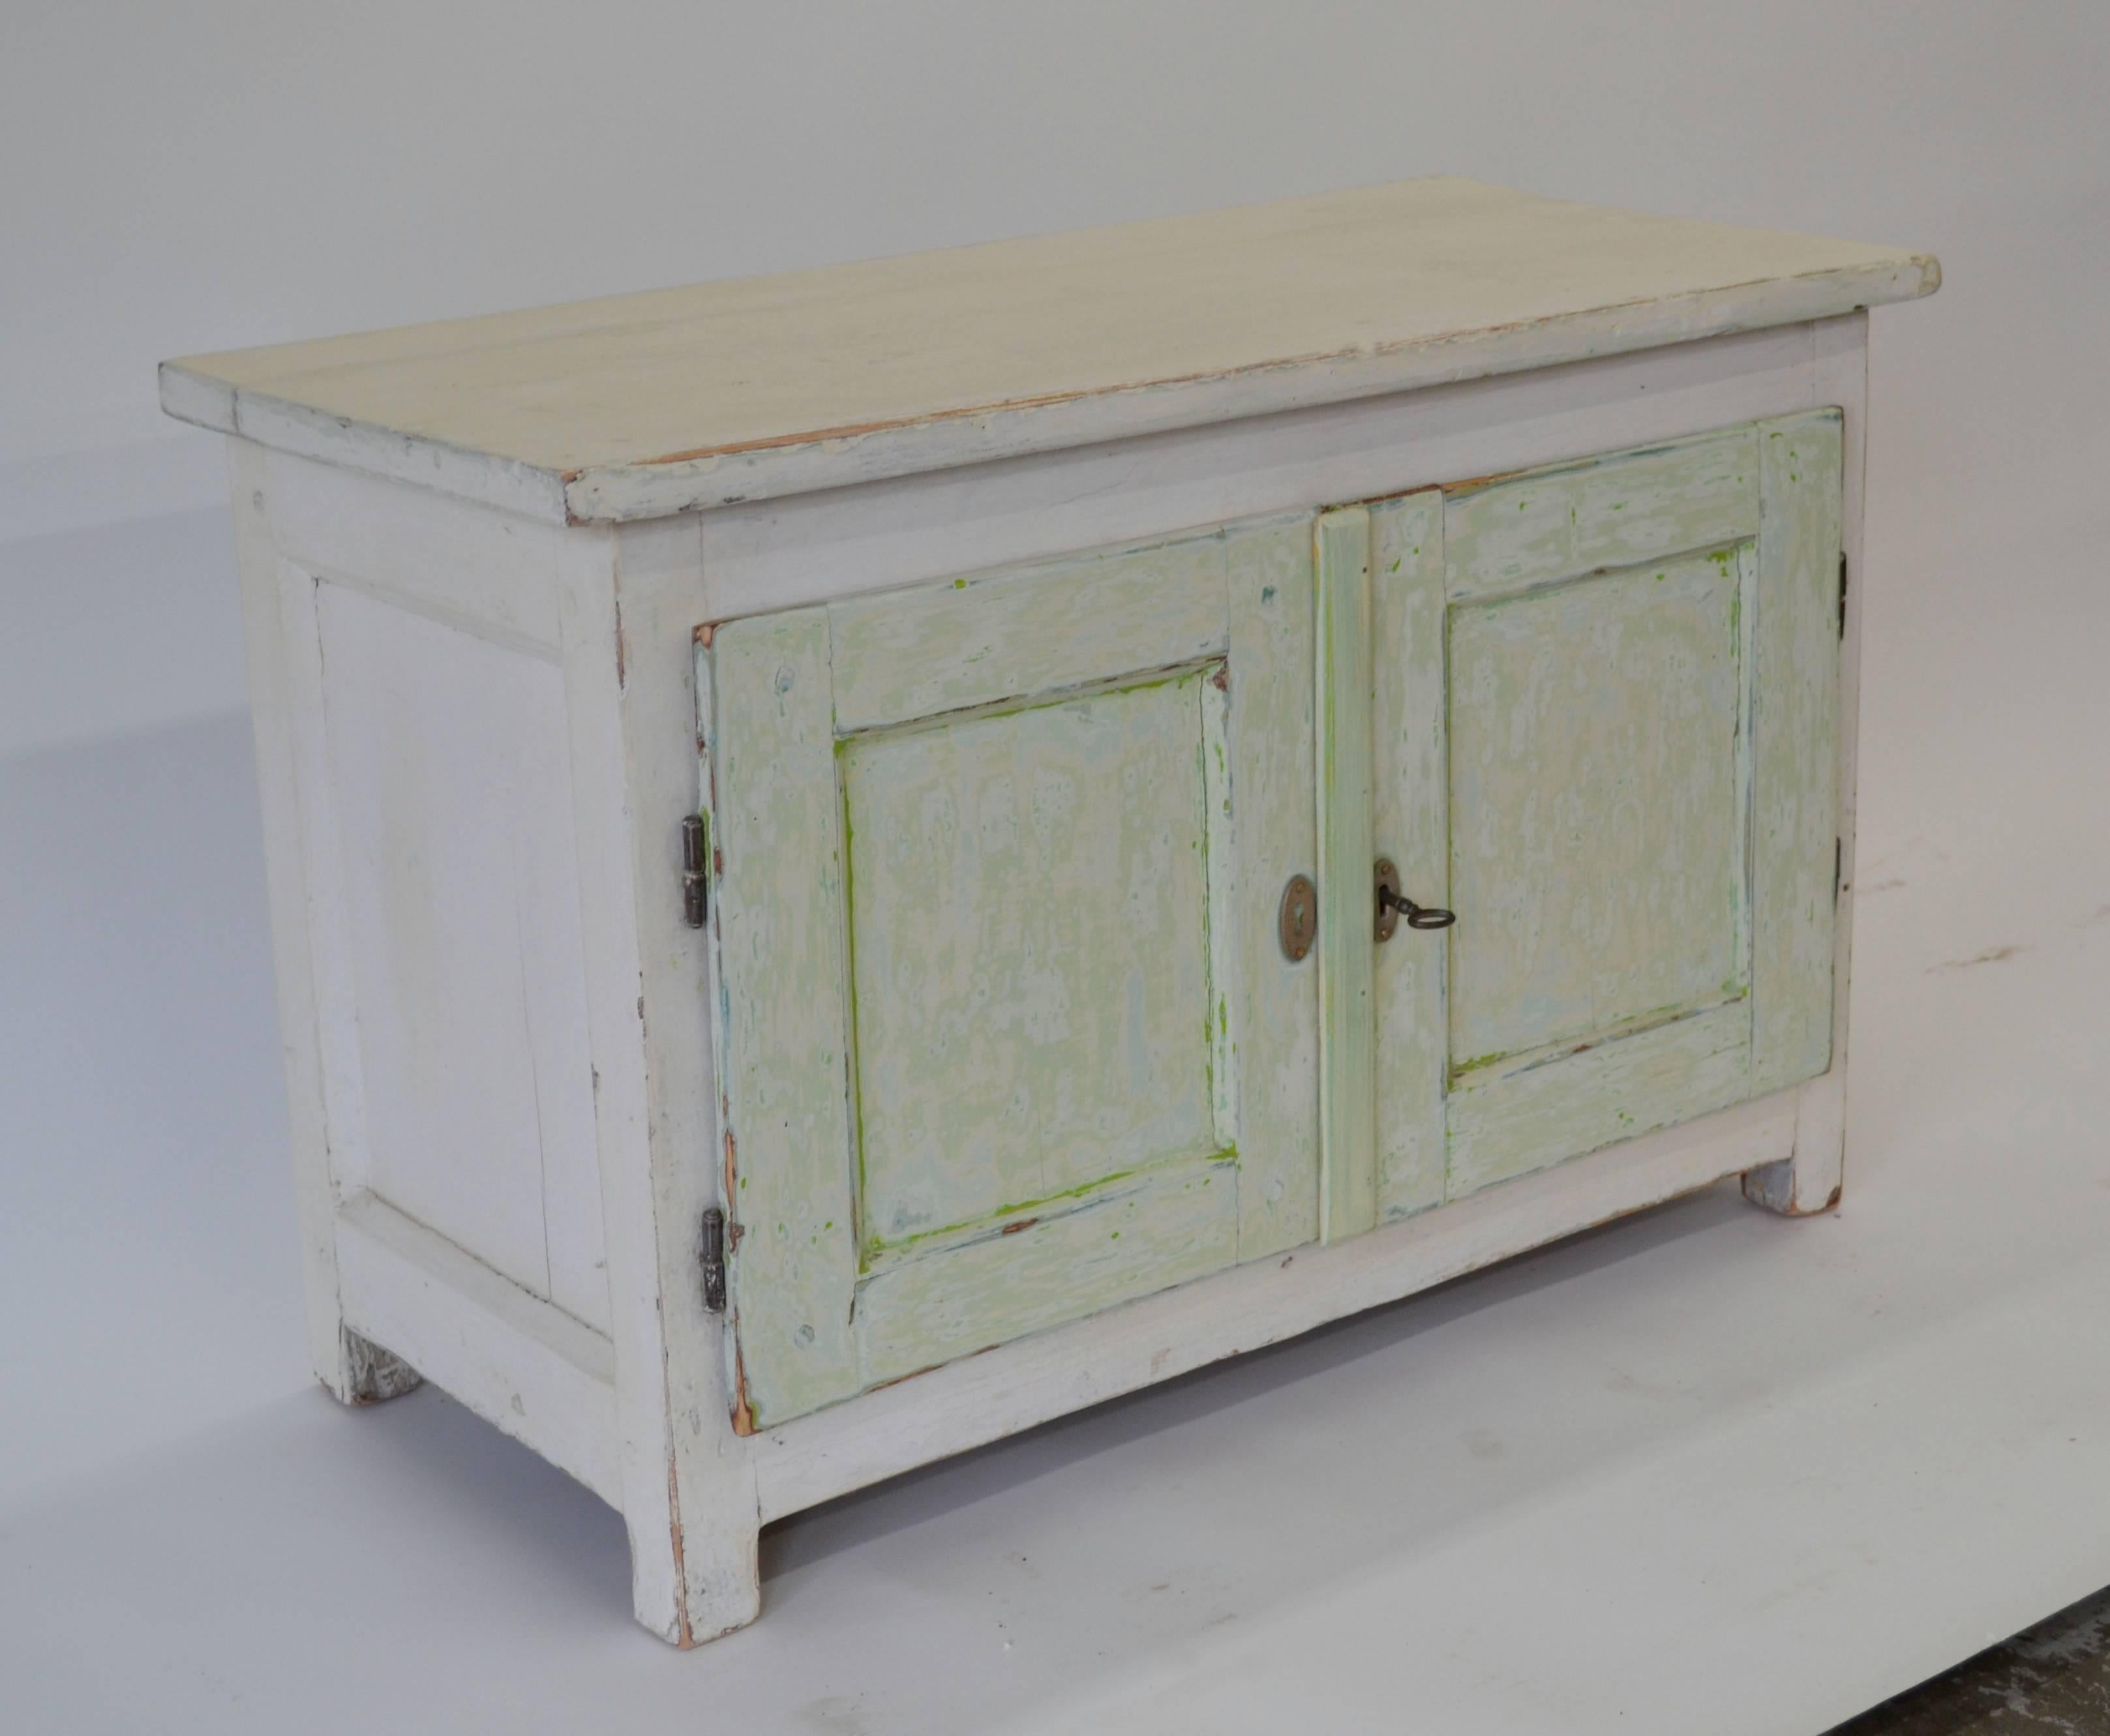 A useful little pine water cupboard with wide-swinging doors, paneled sides, and an attractive planked interior. In old worn green and white paint.